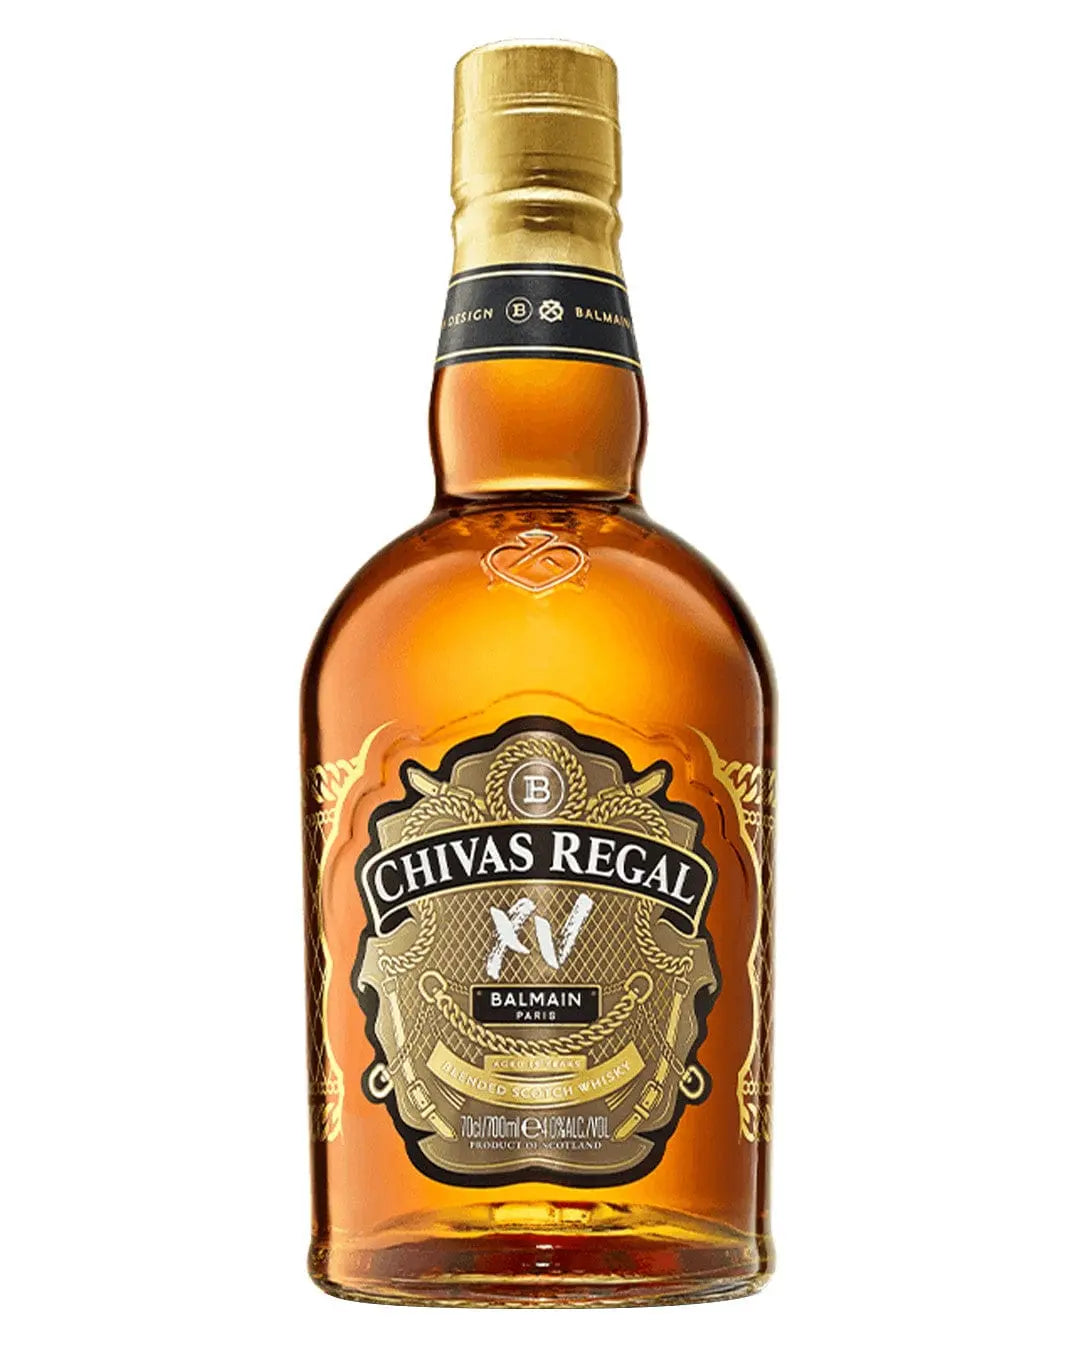 Chivas Regal XV Balmain Limited Edition 15 Year Old Whisky, 70 cl Whisky